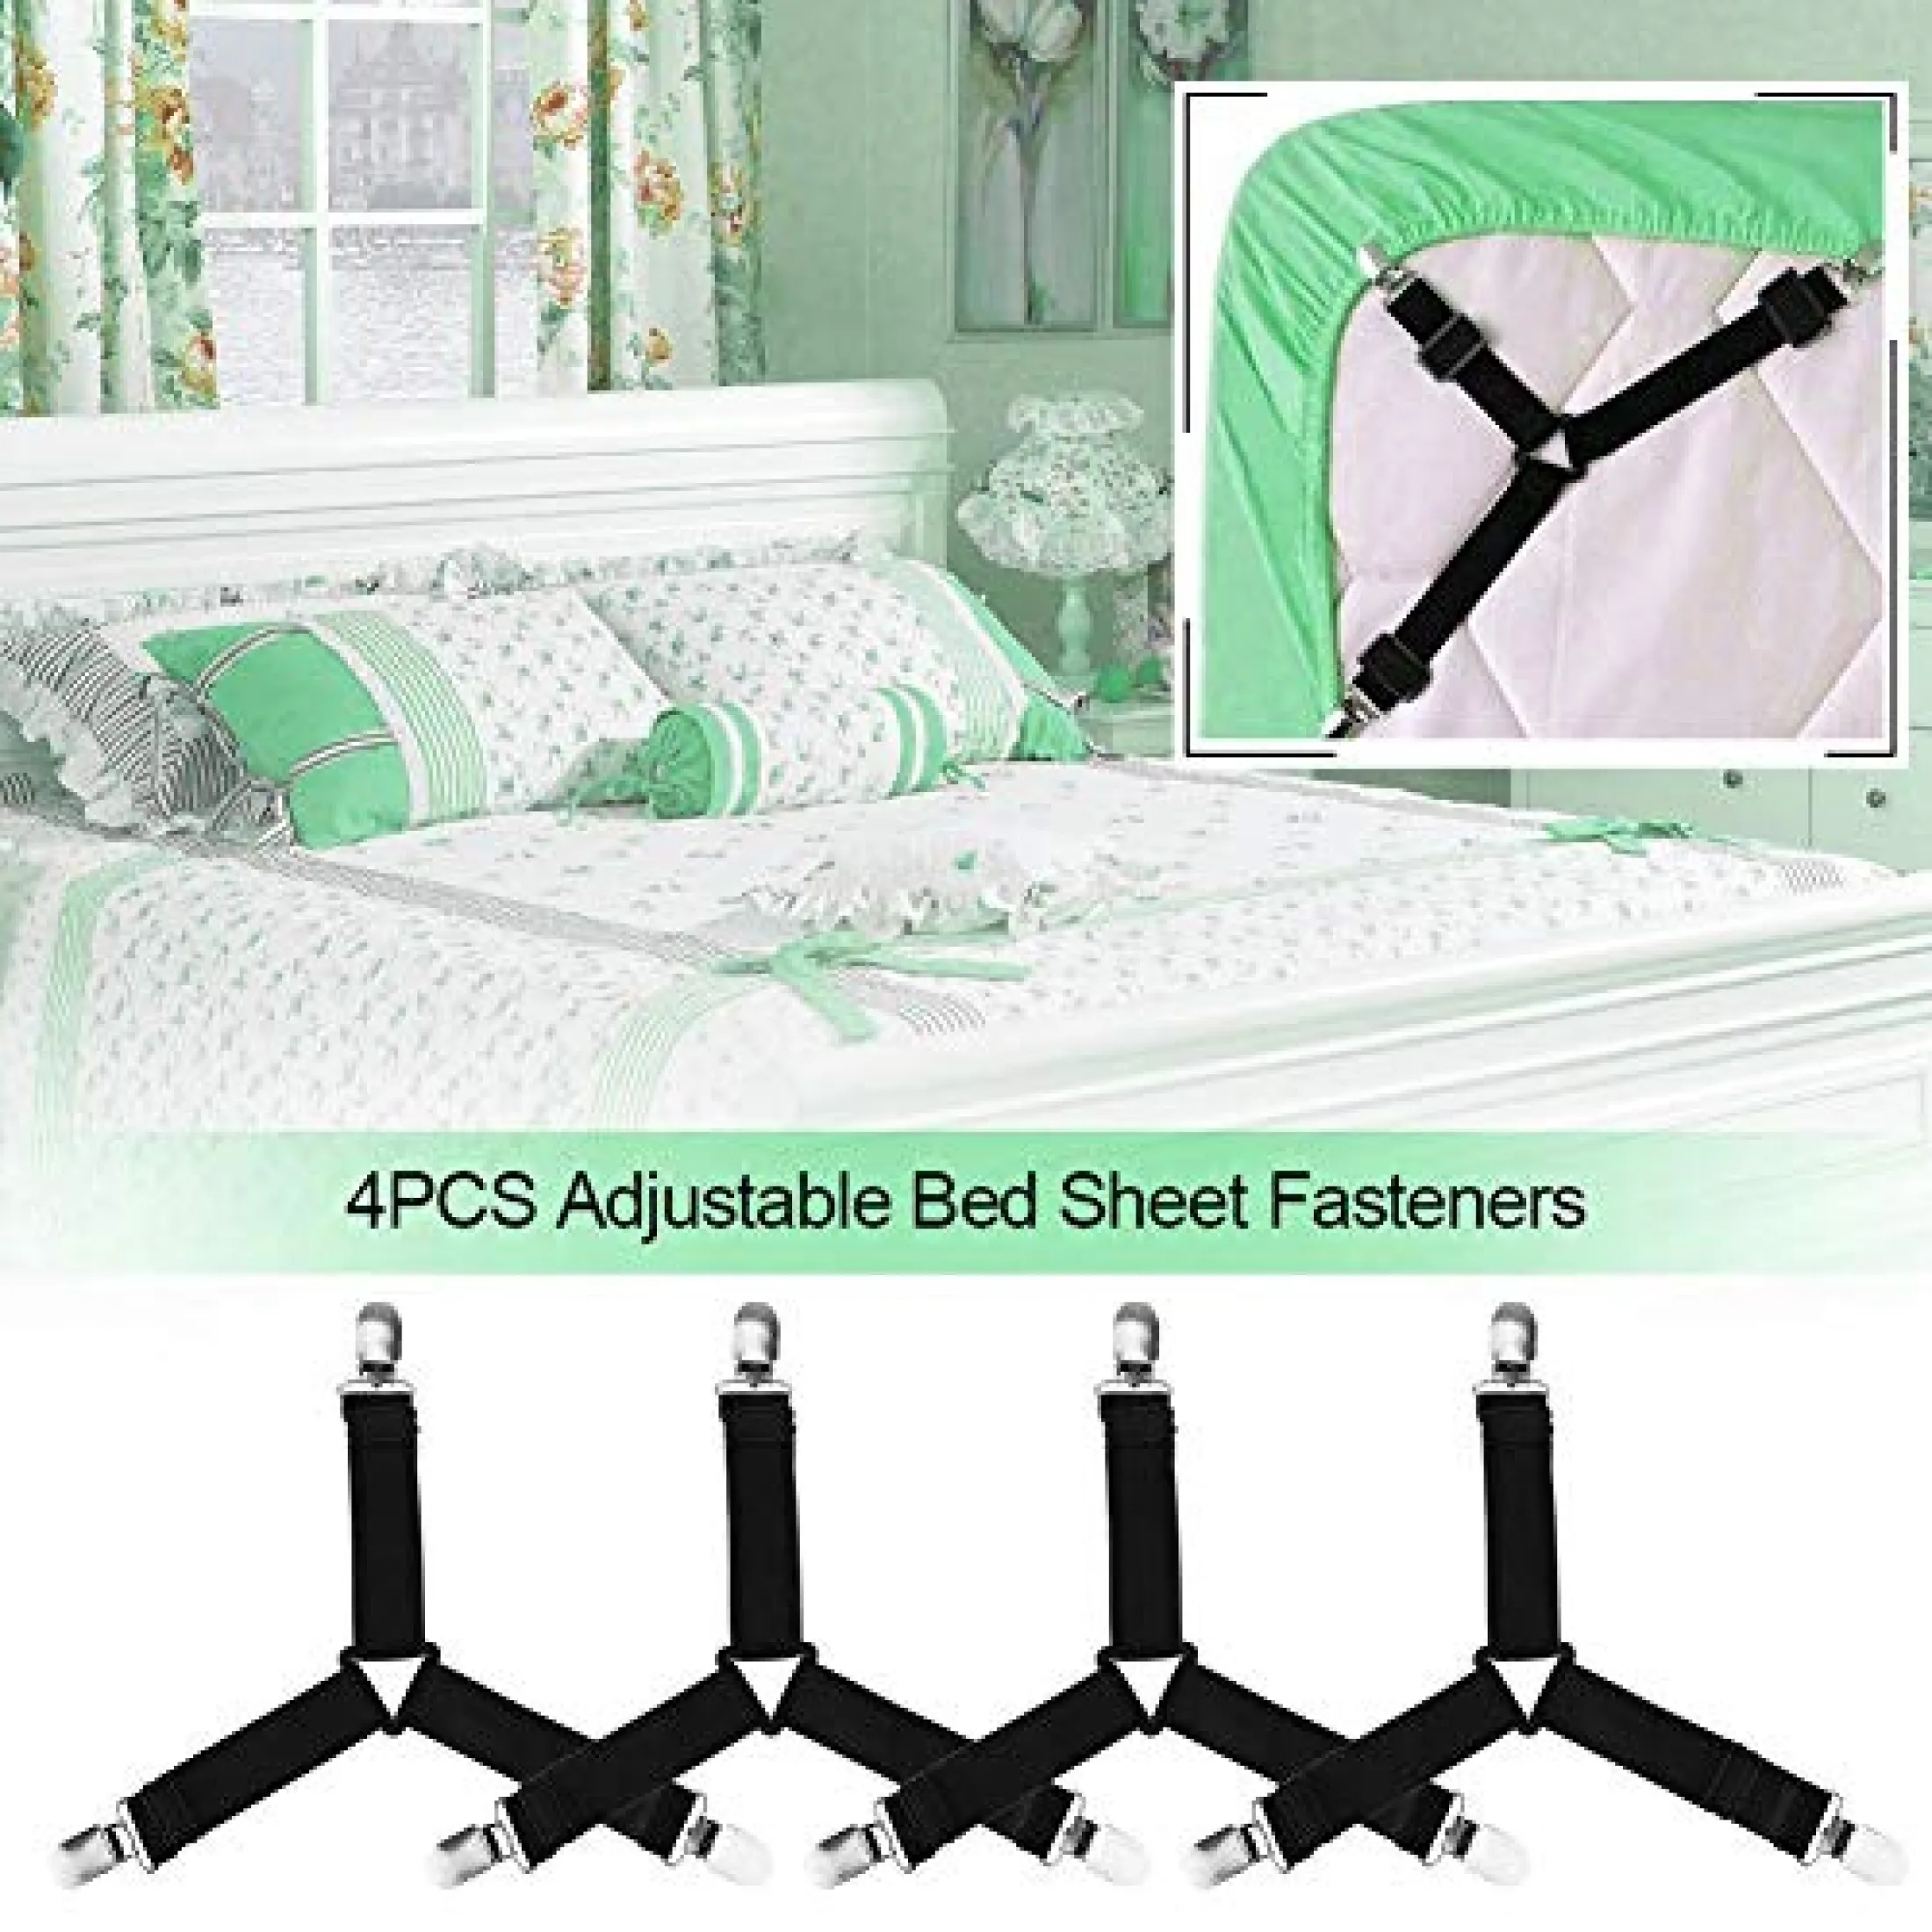 S SEEOOR Bed Sheet Holder Straps Elastic Adjustable Sheet Fasteners Heavy Duty Sheet Grippers for Mattresses Fitted Sheets Flat Sheets 4PCS White Corner Sheet Clips